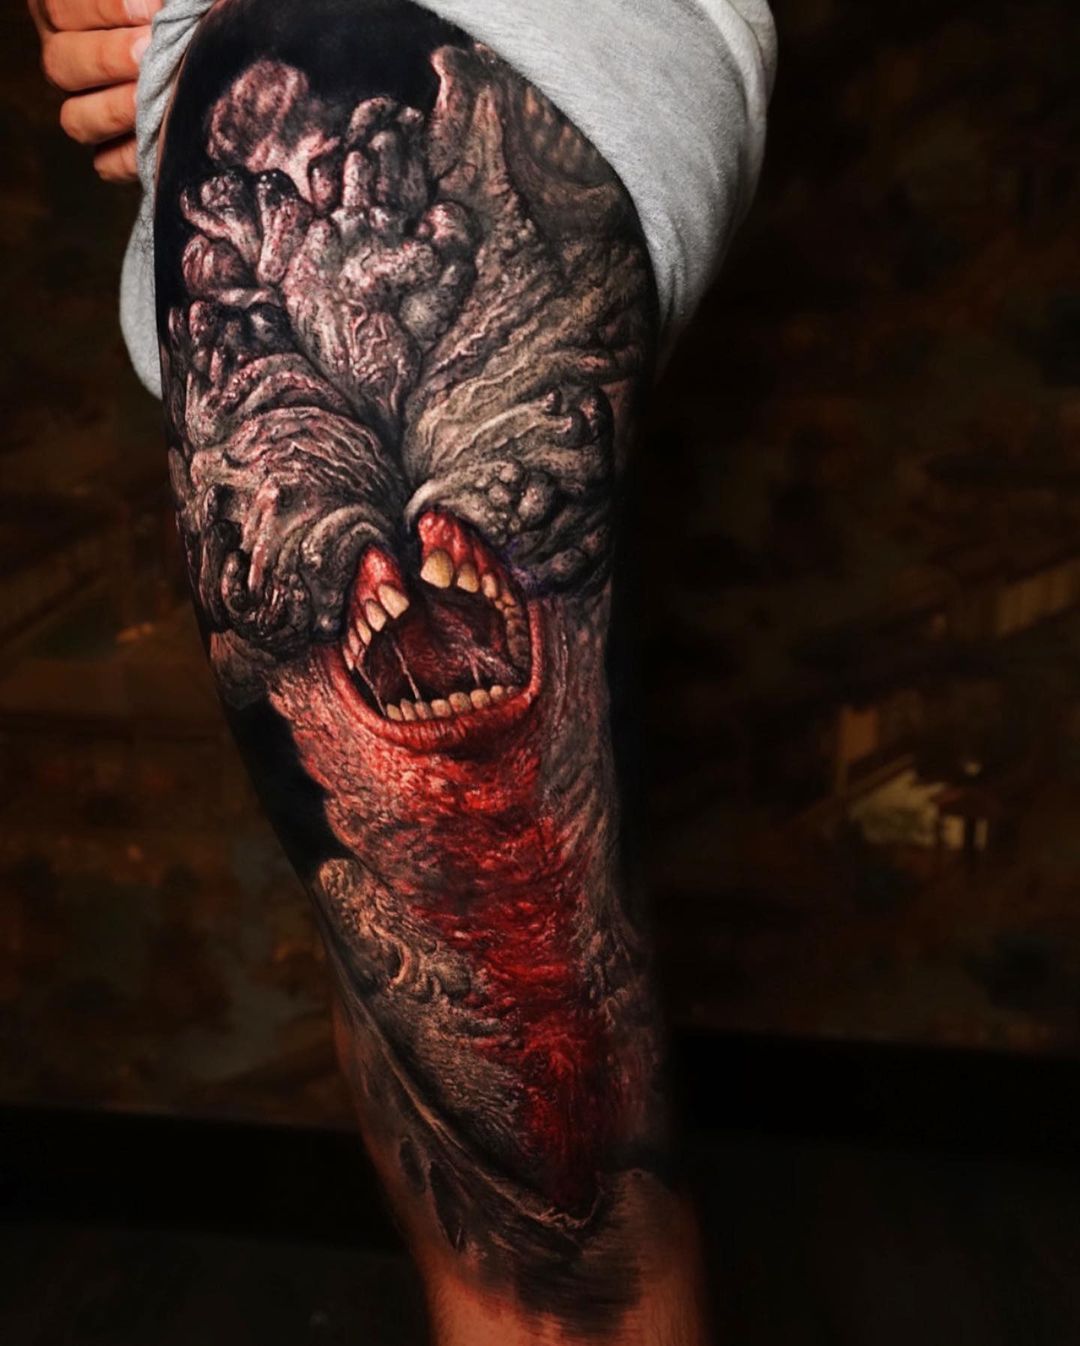 The devil in the details: realistic horror tattoo by Adrian Sanchez